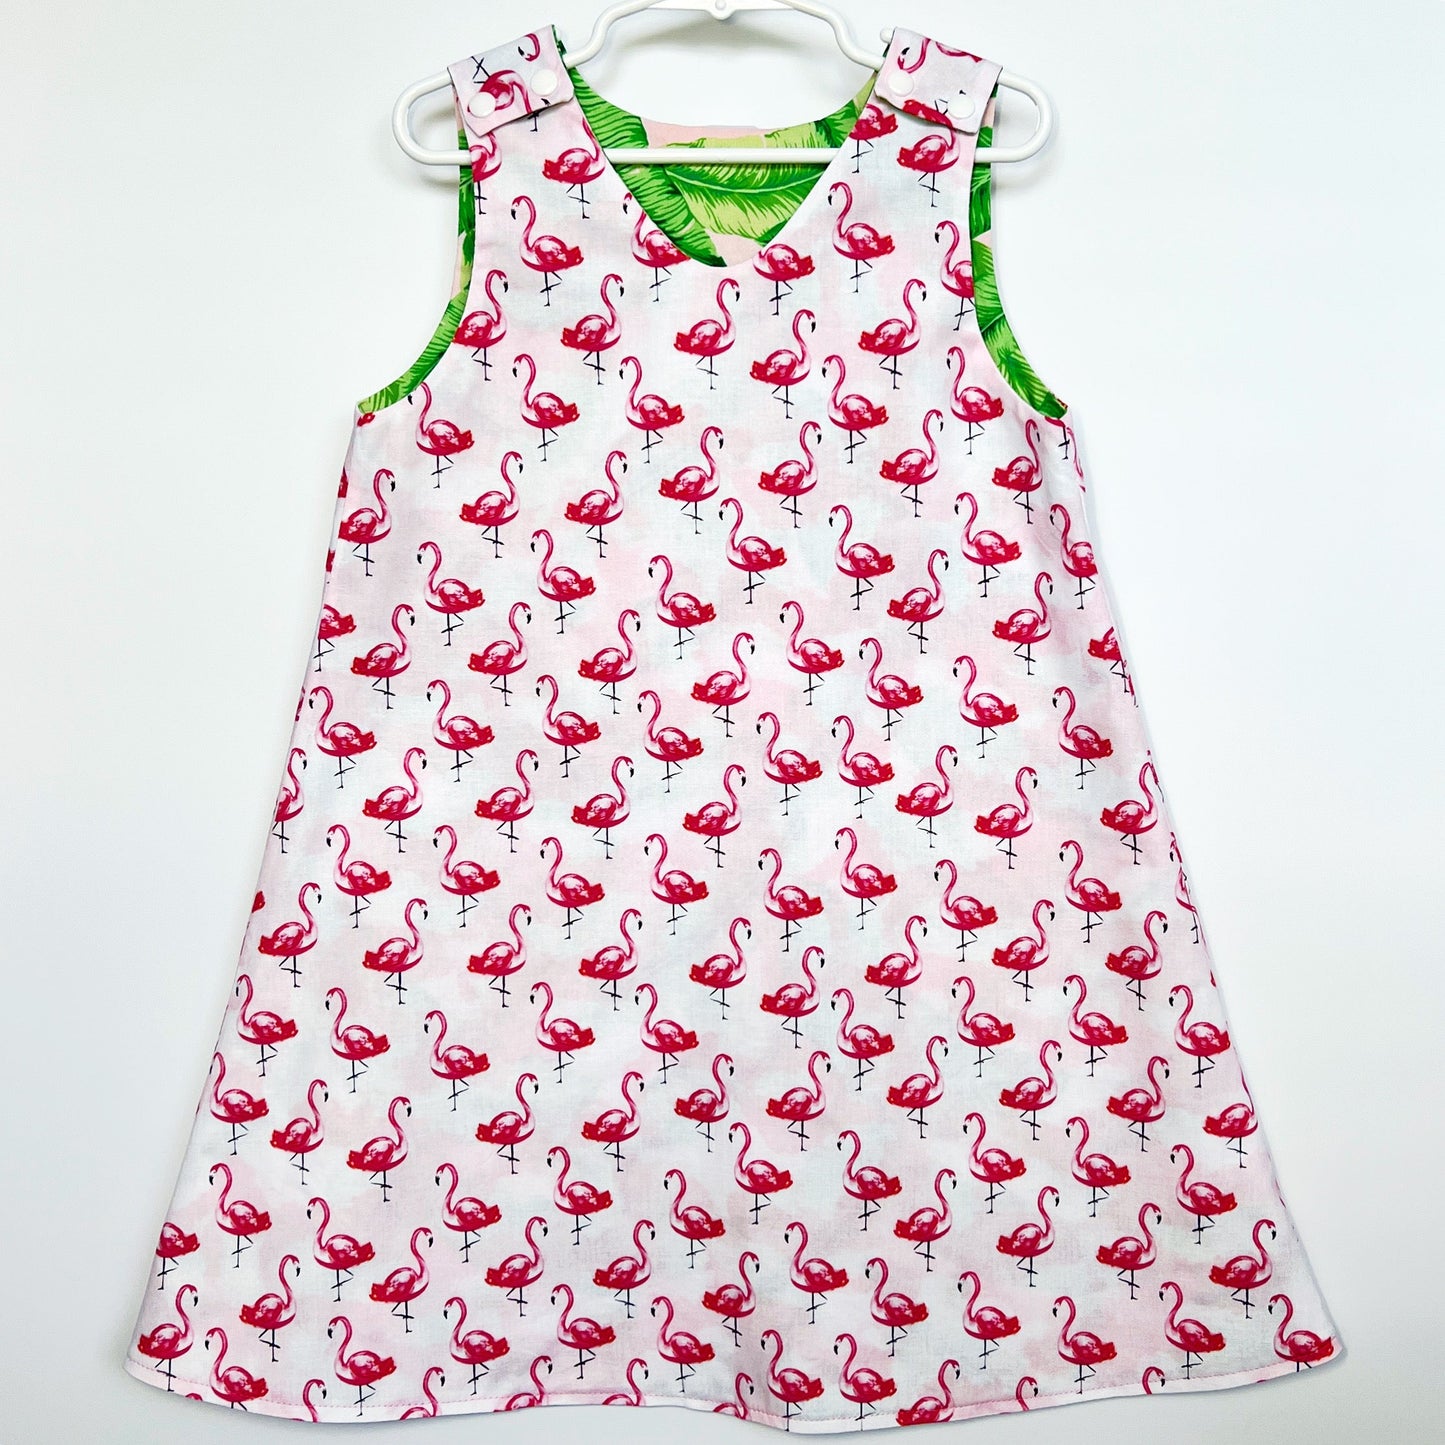 A-line reversible cotton dress "Flamingos and Tropical leaves "